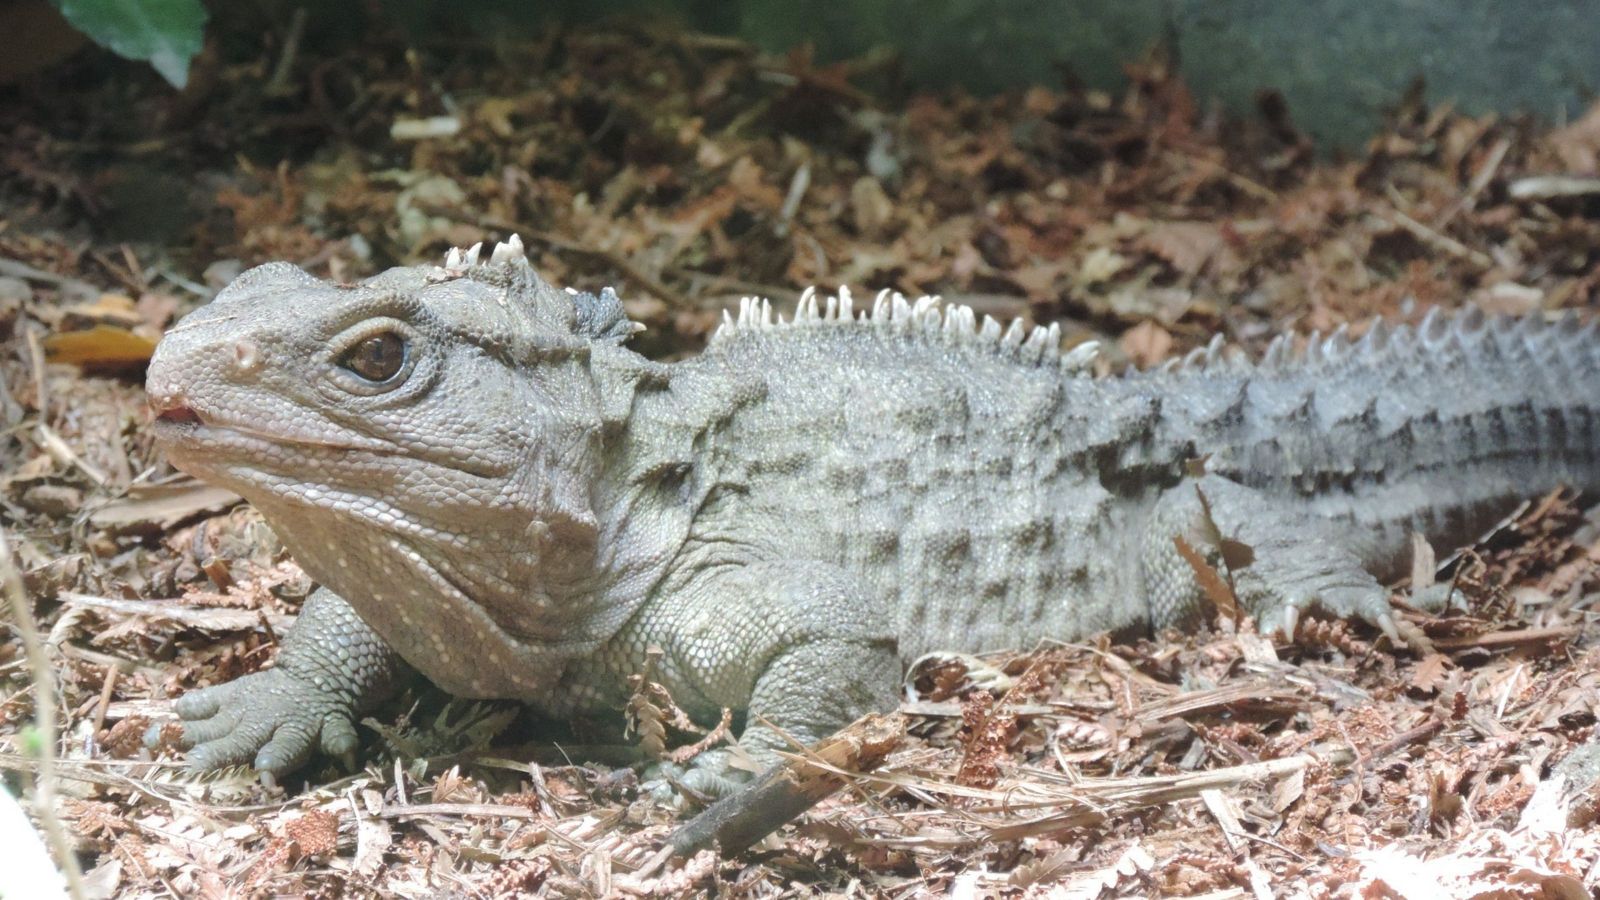 image of a tuatara which is a lizard with spines along back and wise eyes